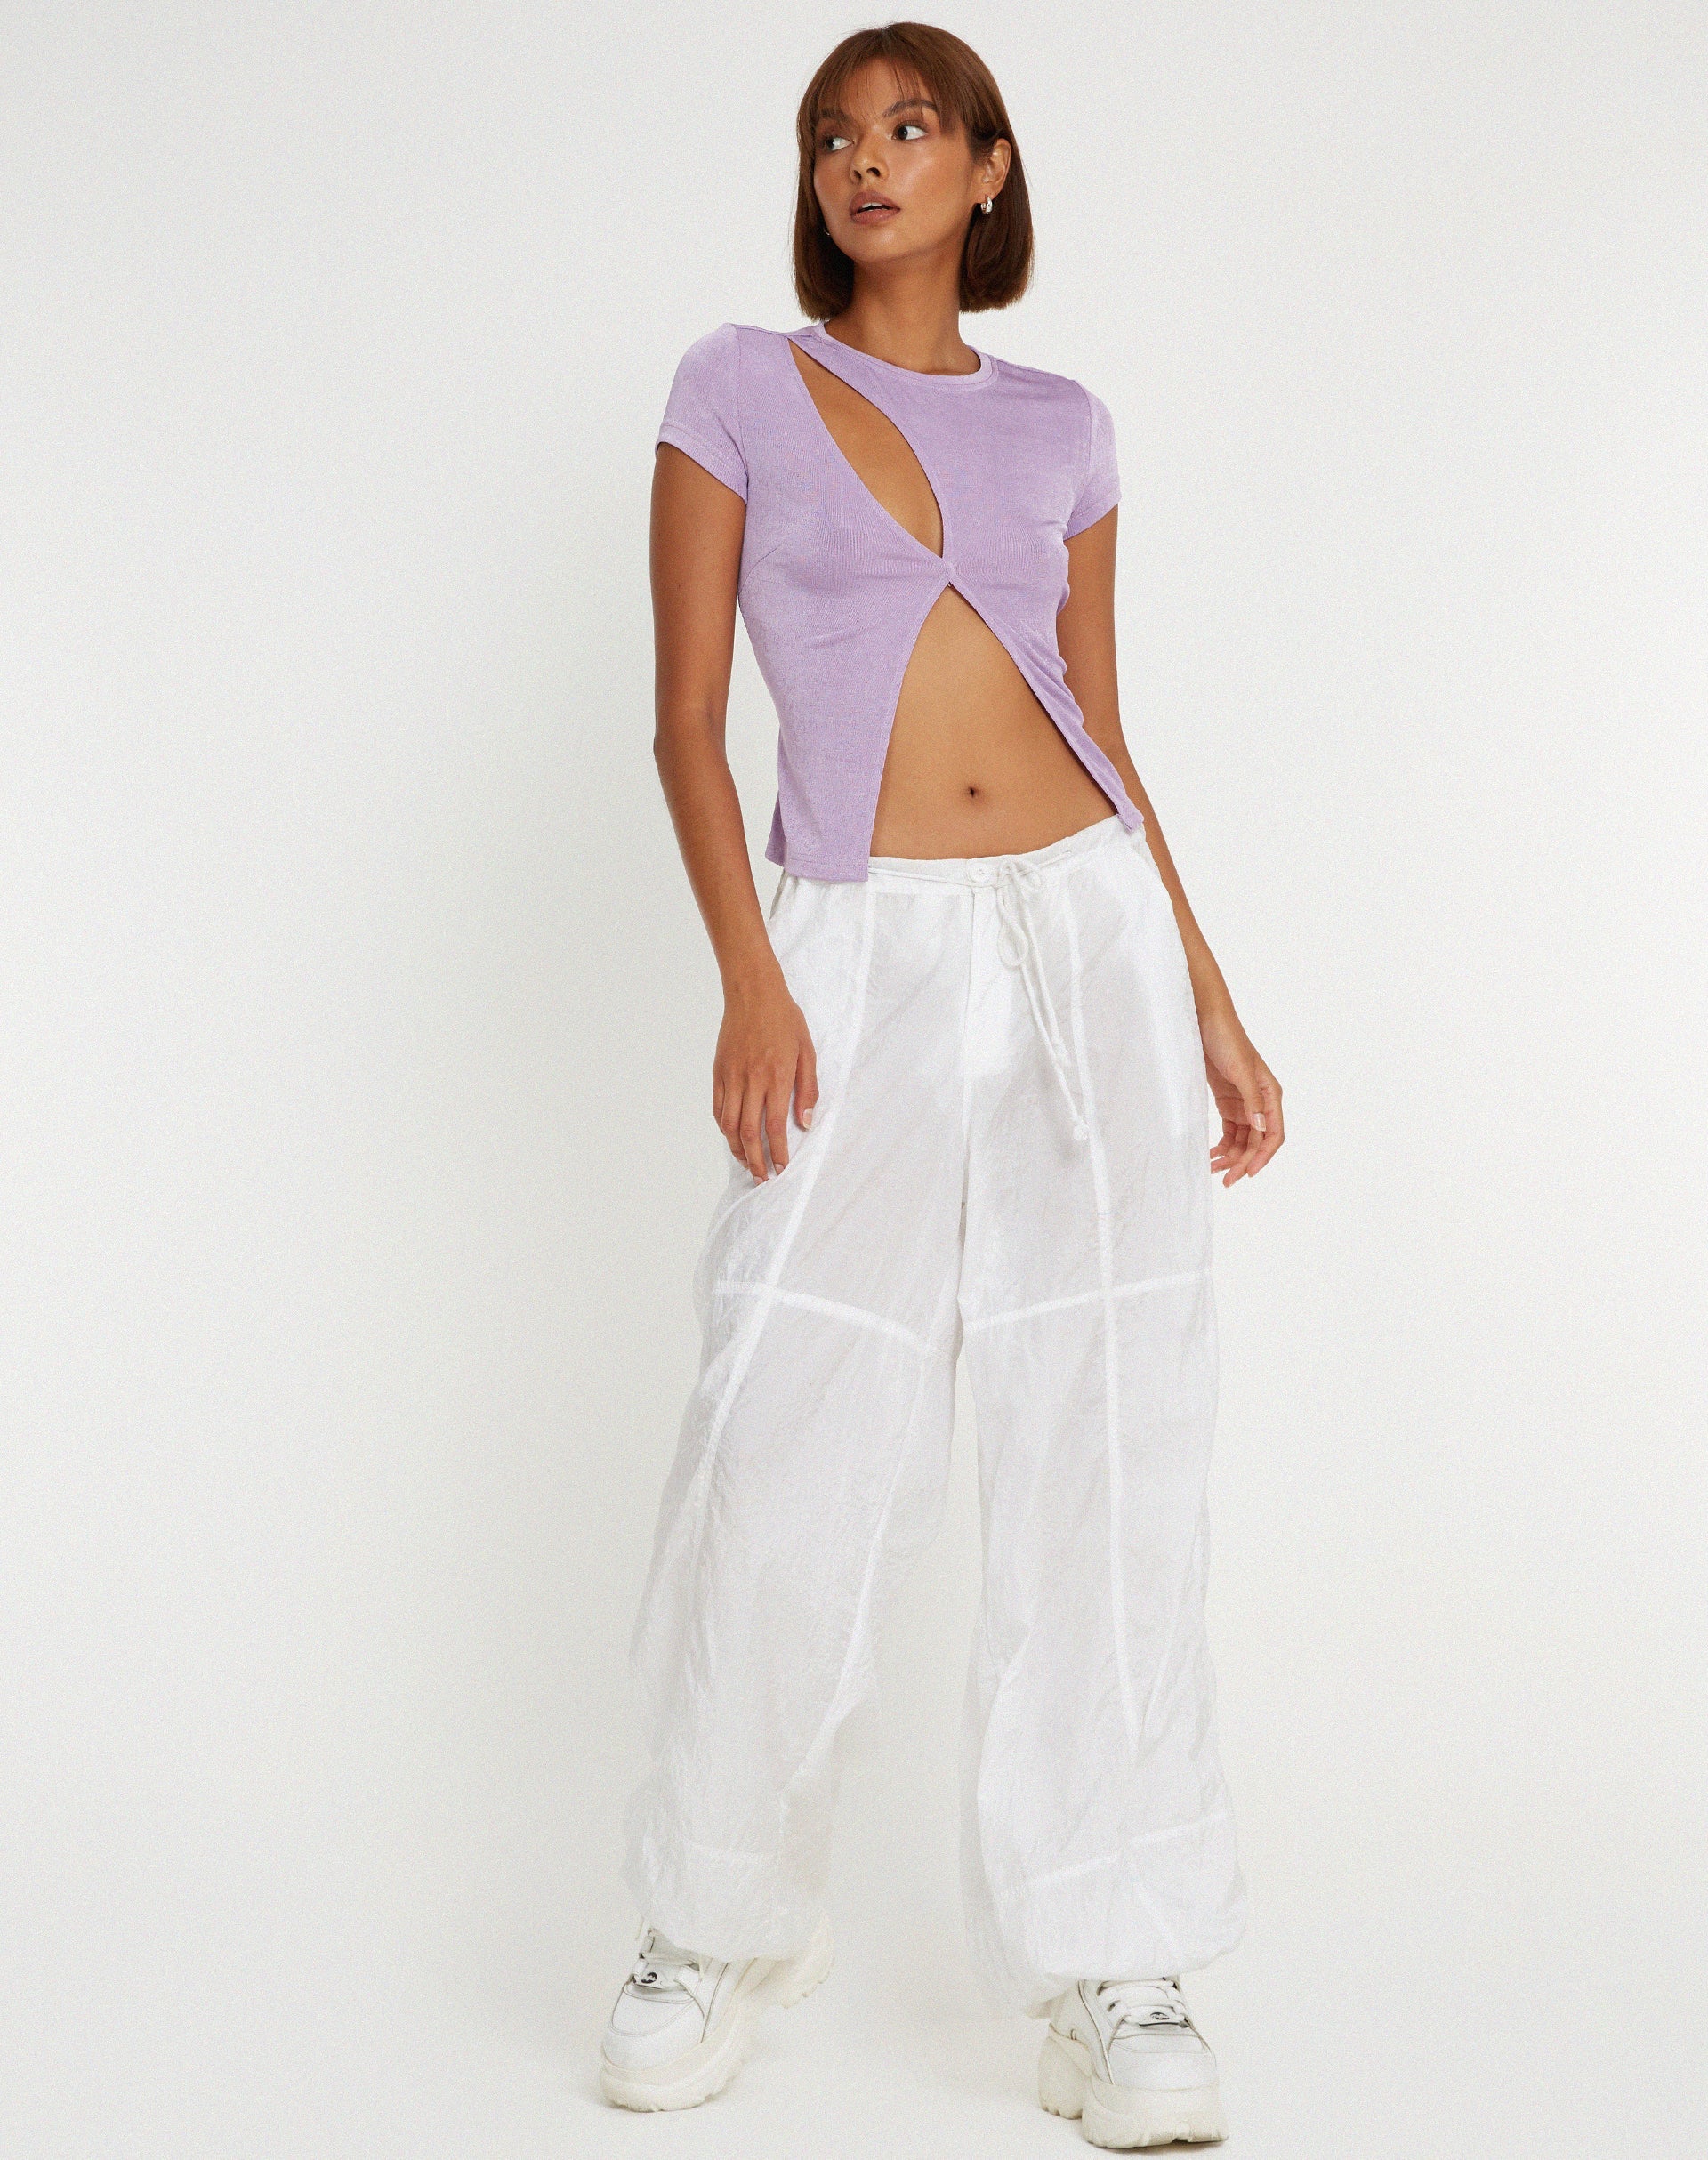 image of Maha Cutout Top in Lavender